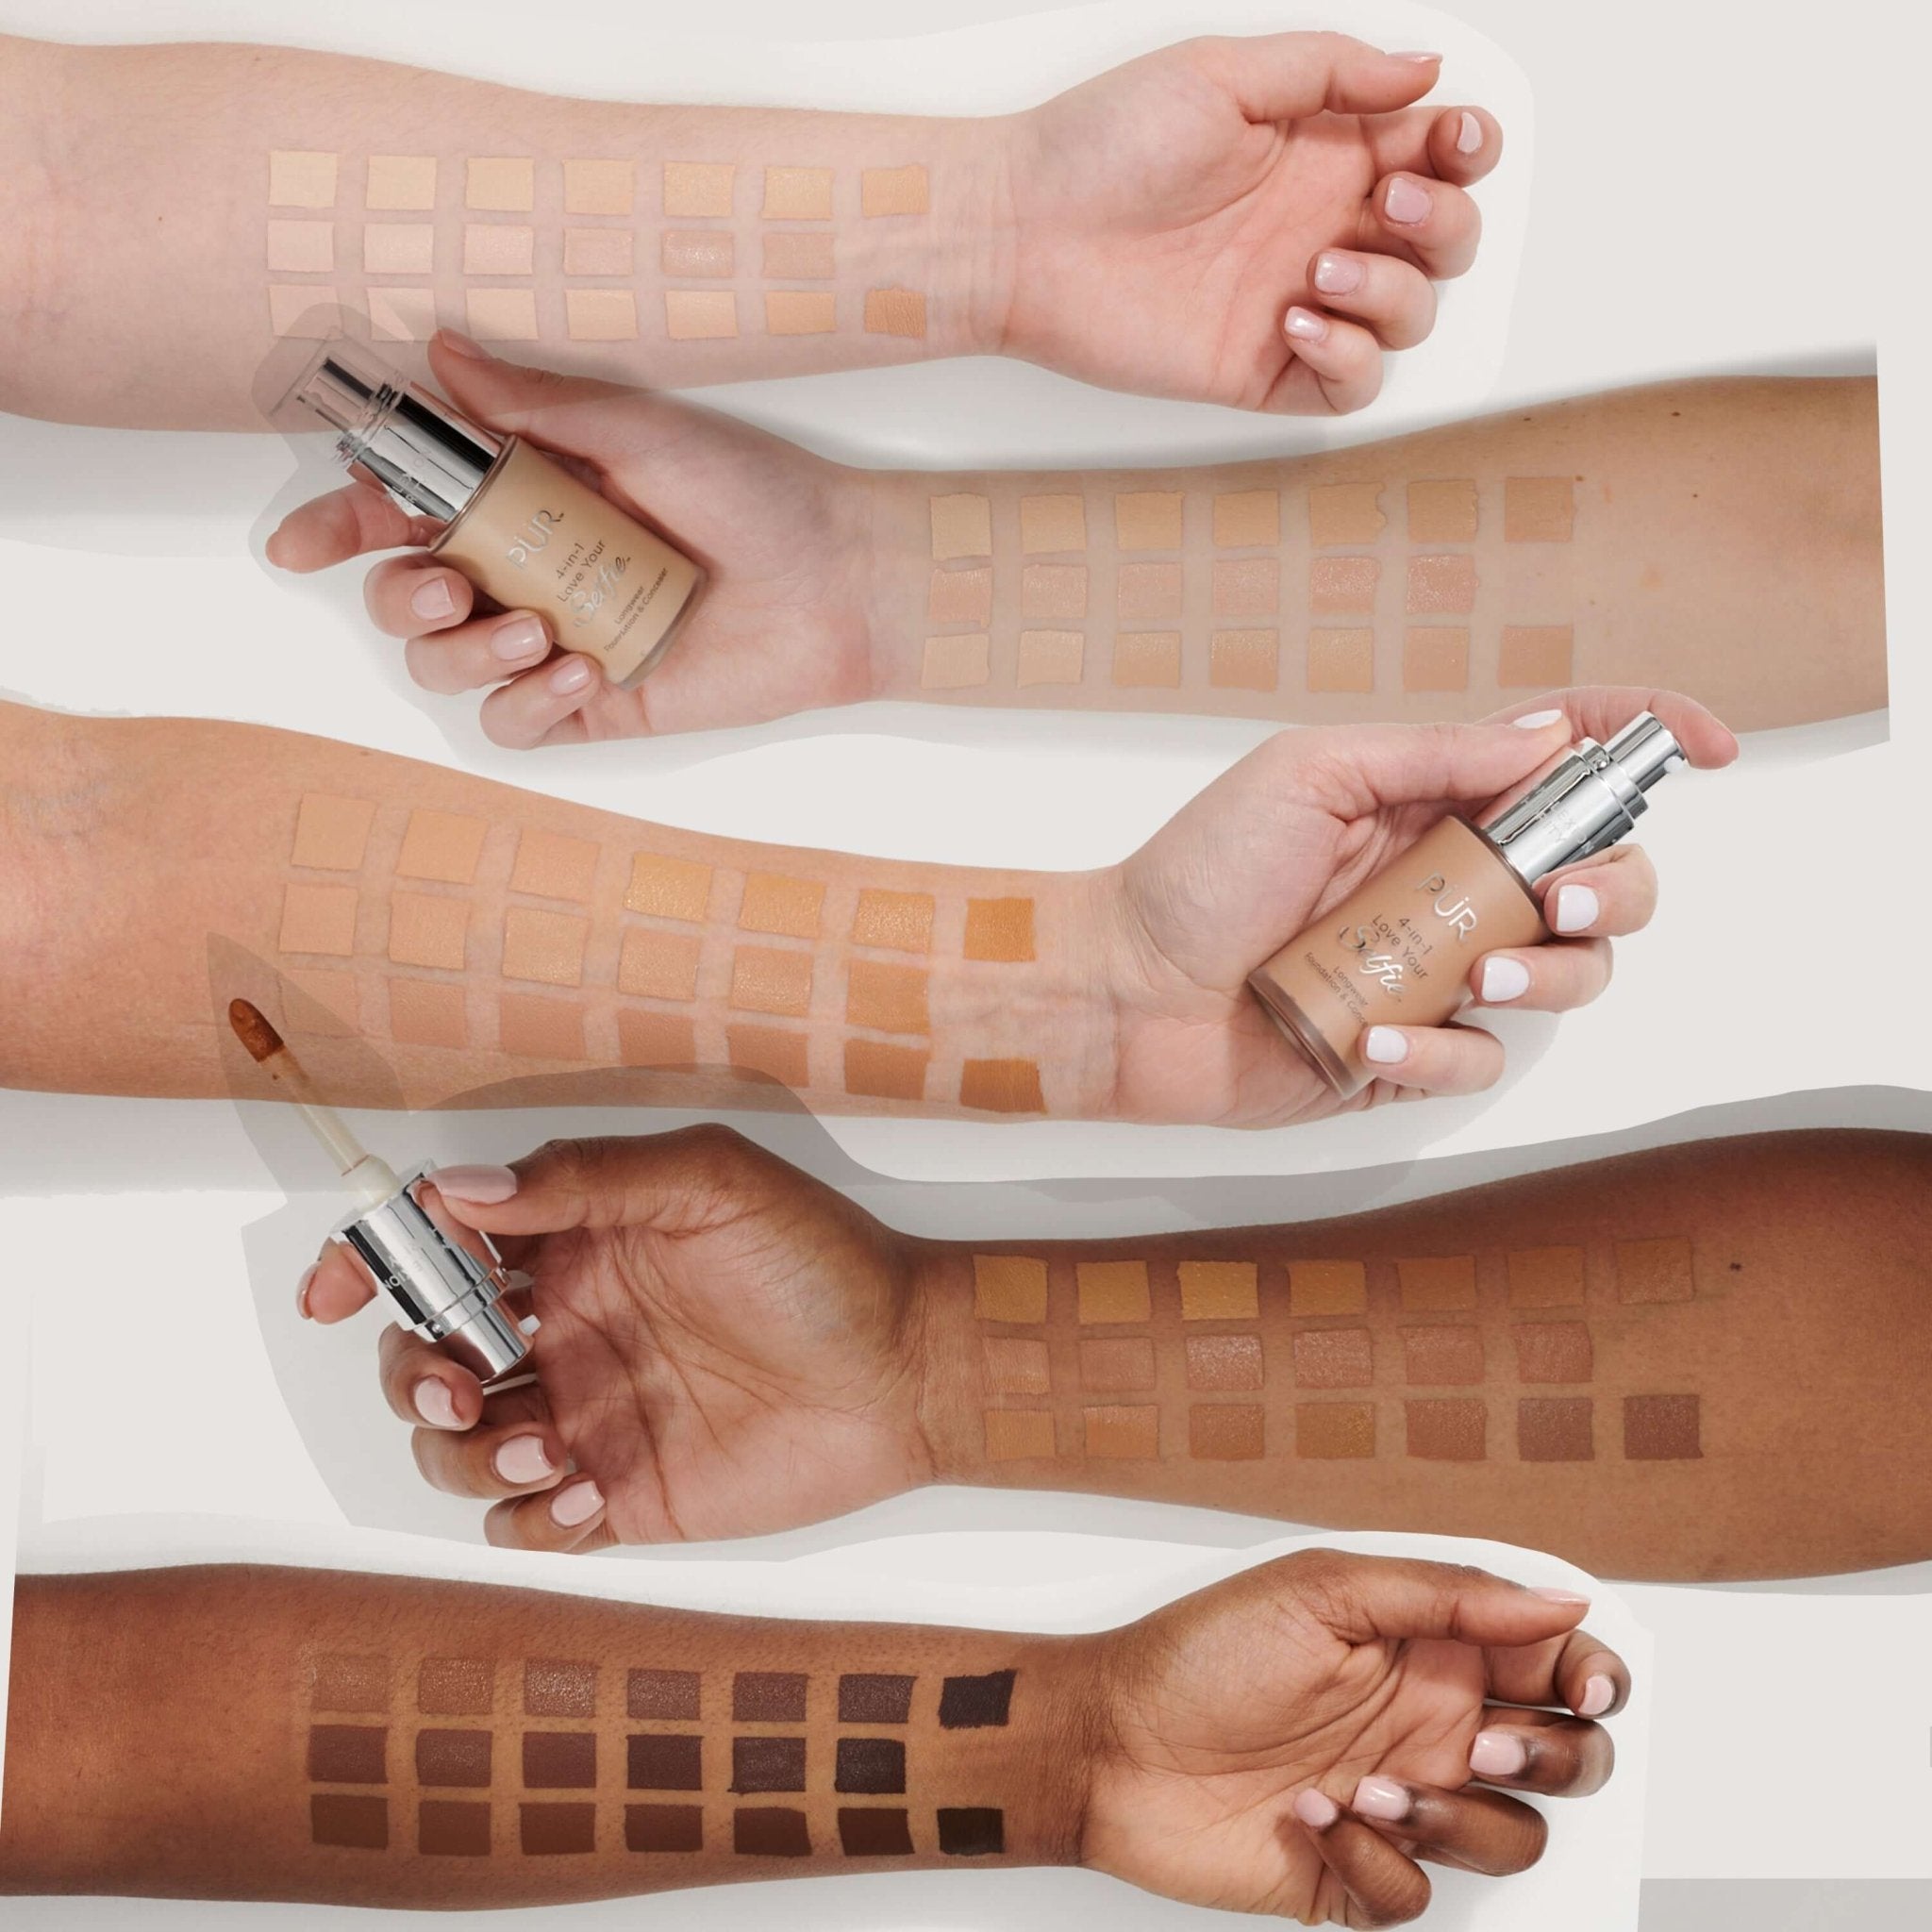 This New Complexion Product Is Redefining Standards One Shade At A Time - PÜR Beauty